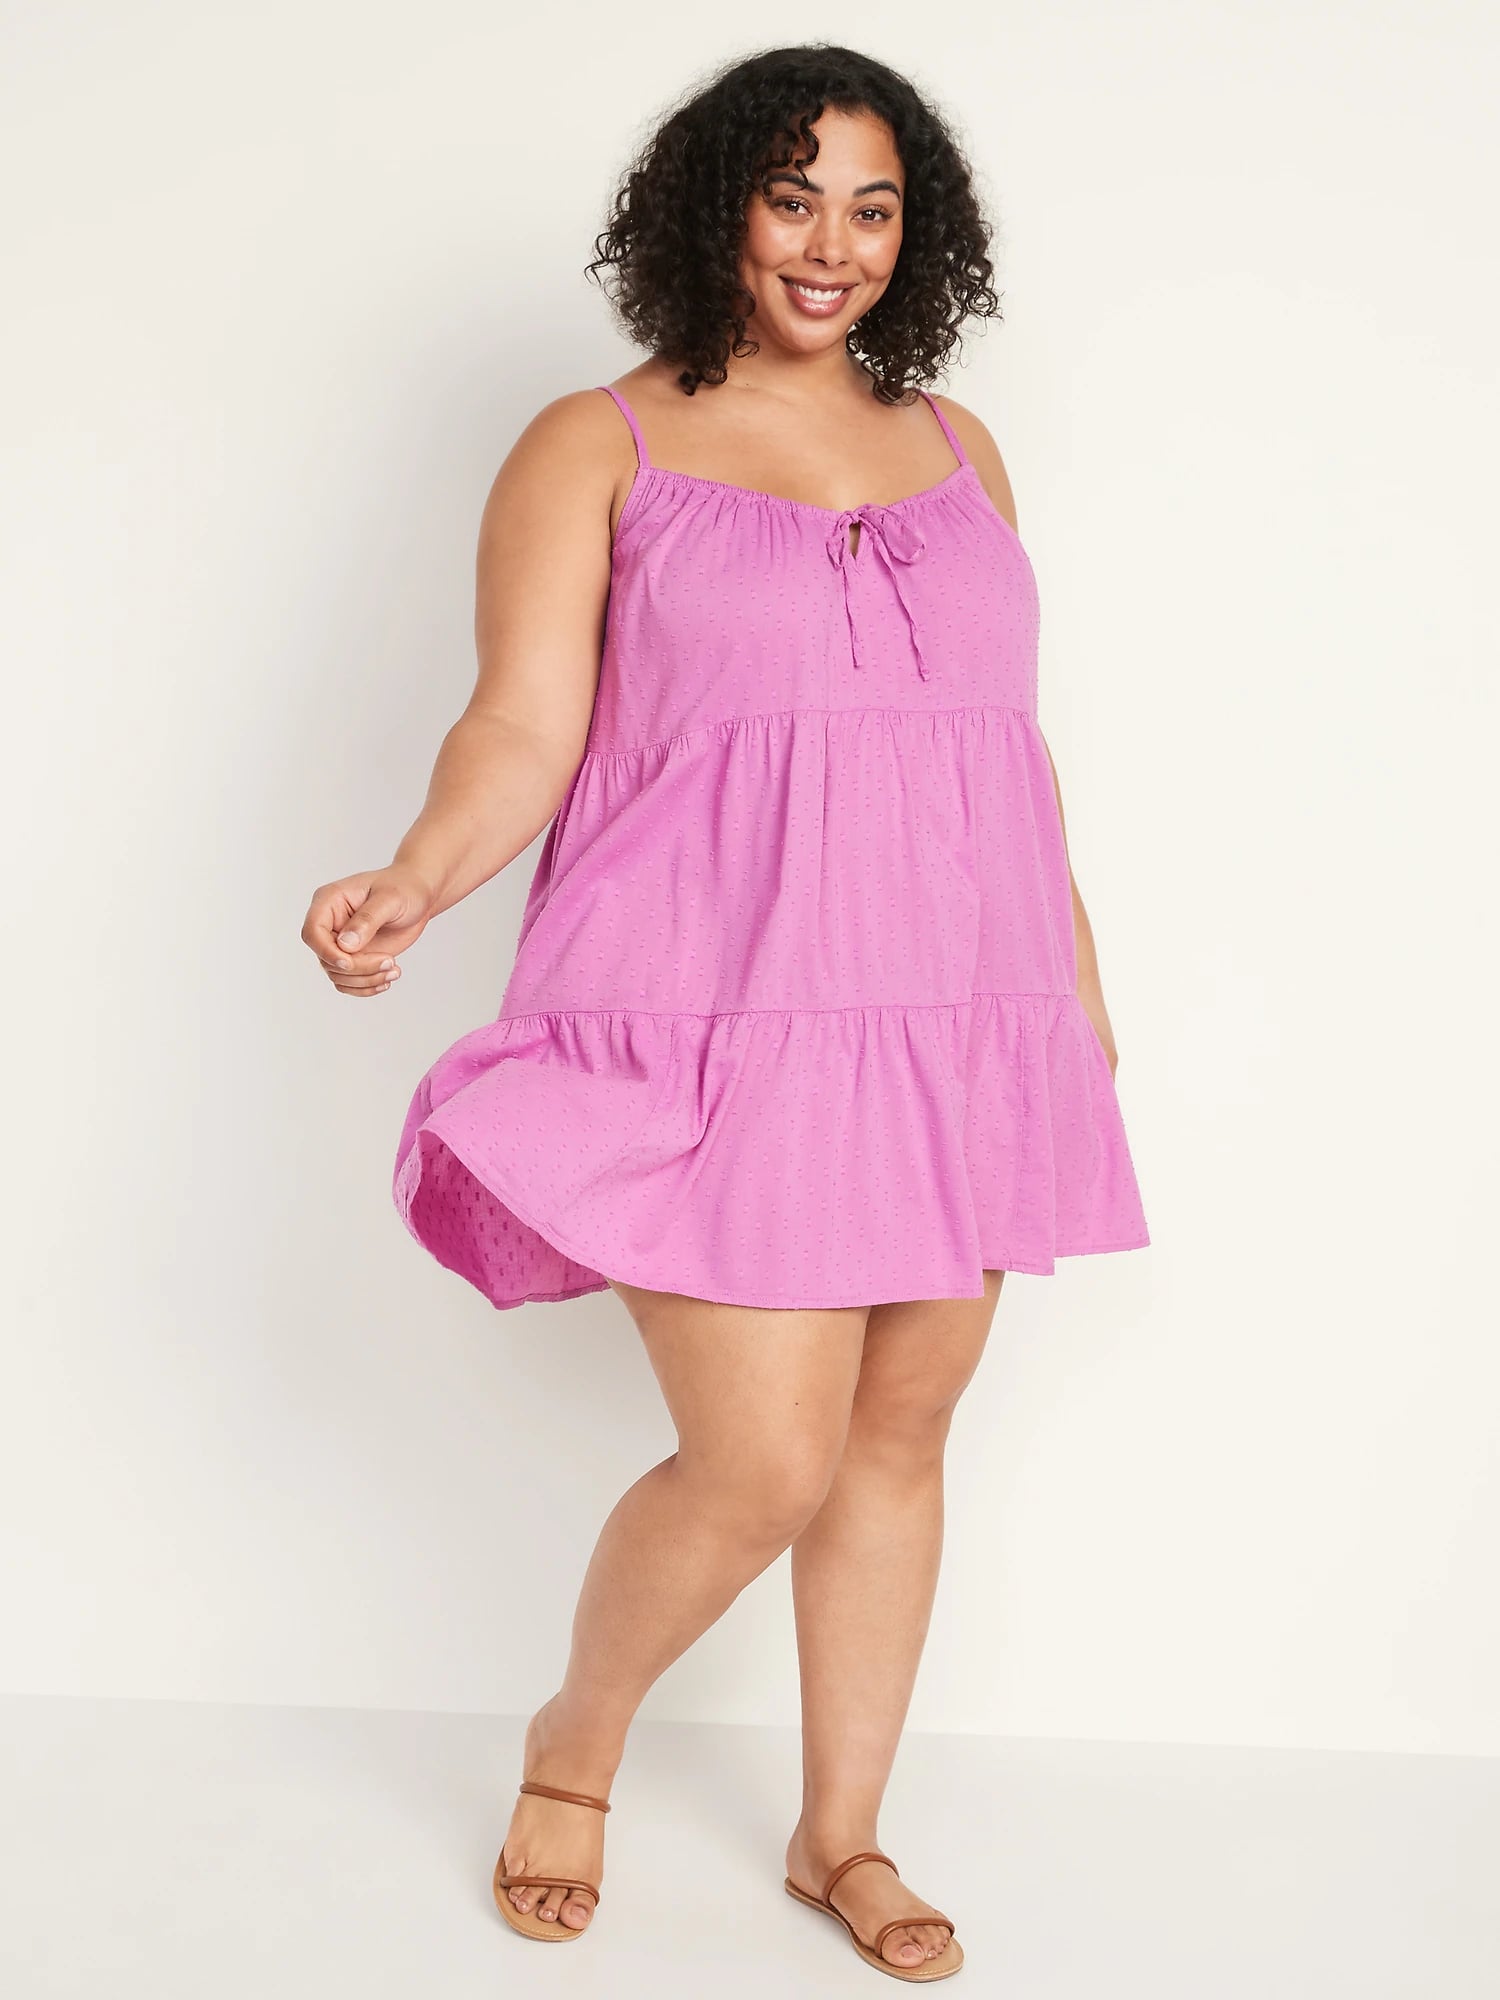 5 must have plus size dresses for the Spring and Summer  Plus size  fashion, Plus size dresses, Plus size outfits